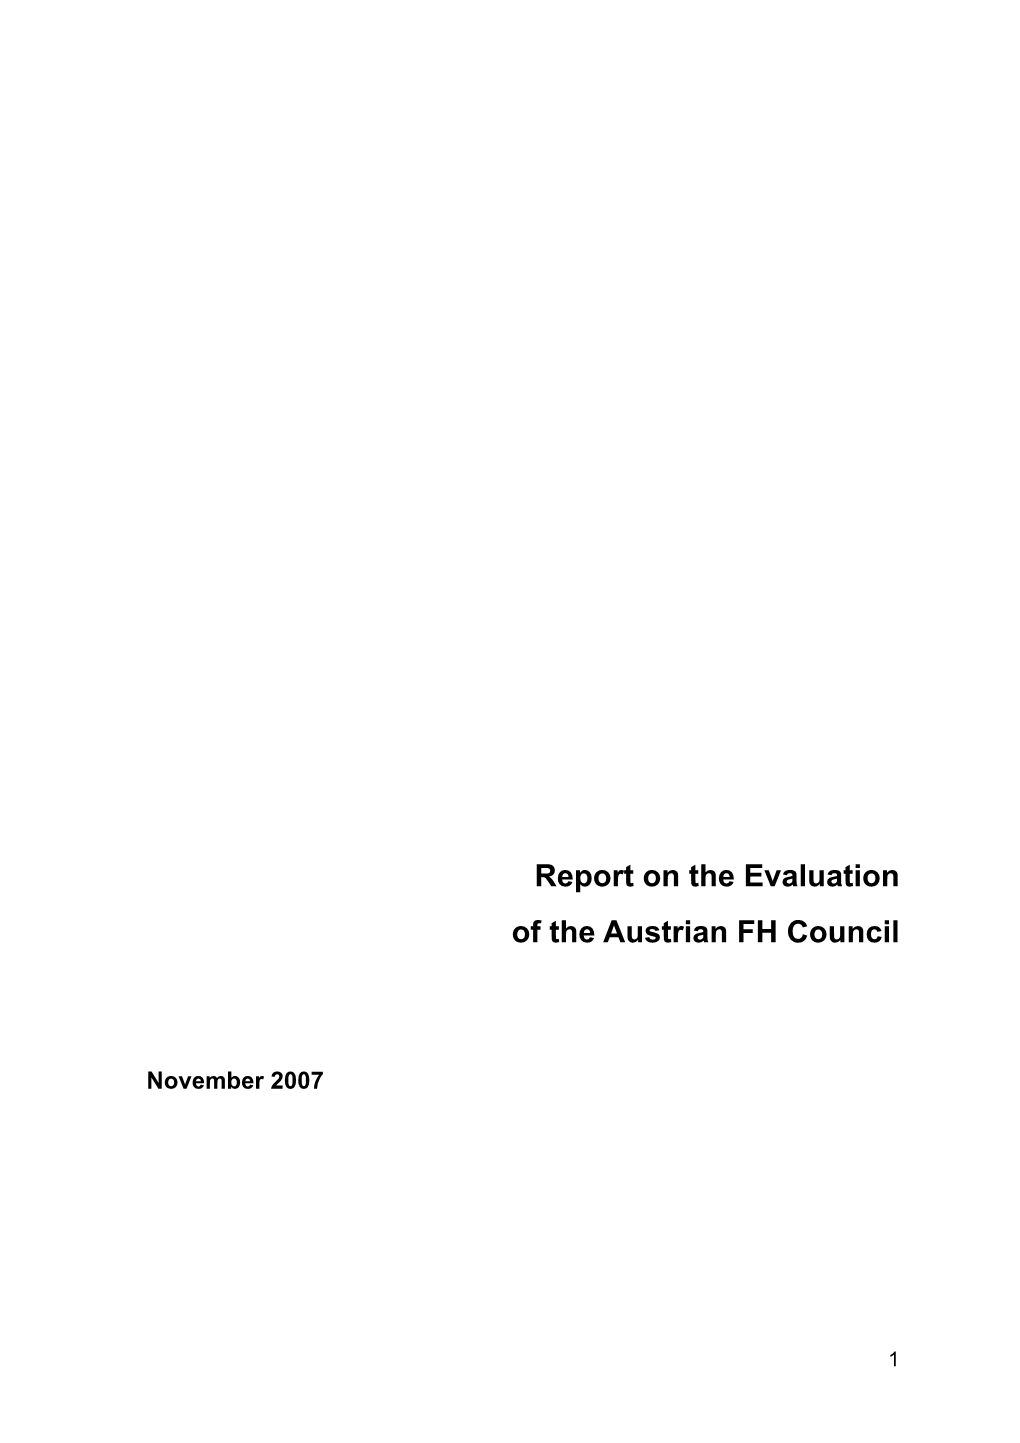 Report on the Evaluation of the Austrian FH Council